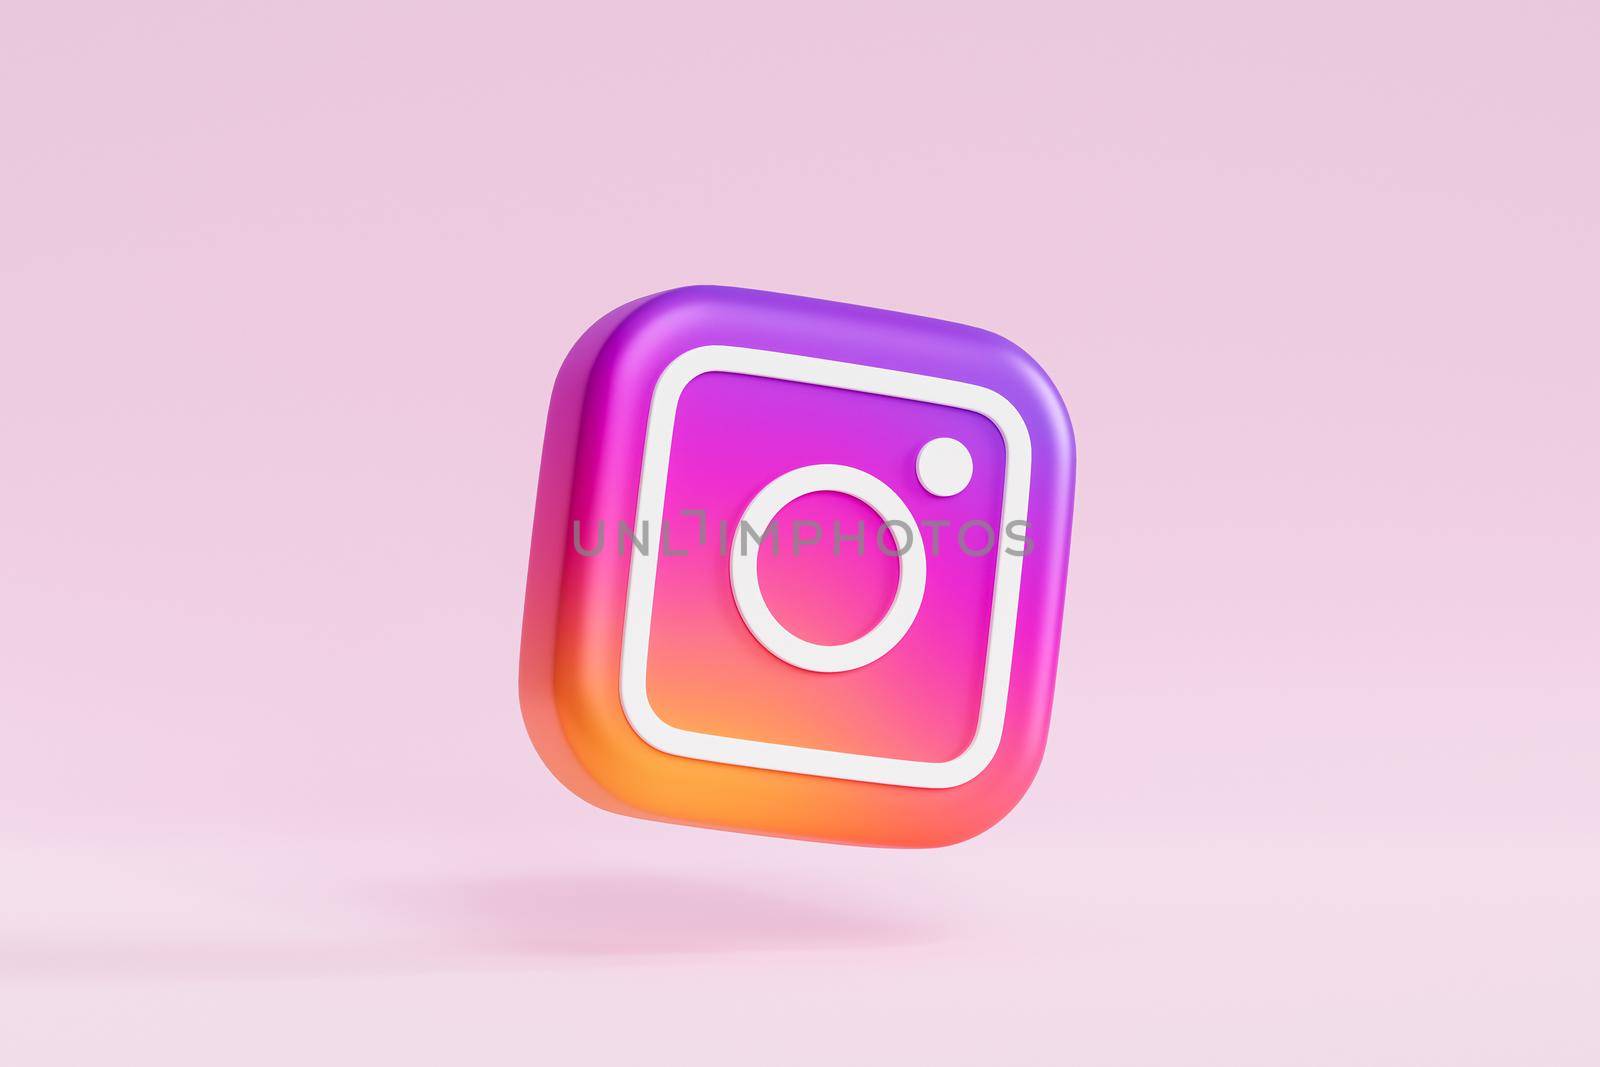 Melitopol, Ukraine - May 27 2021: Instagram logo icon, photography social media app, pink beige background, 3d render by Frostroomhead